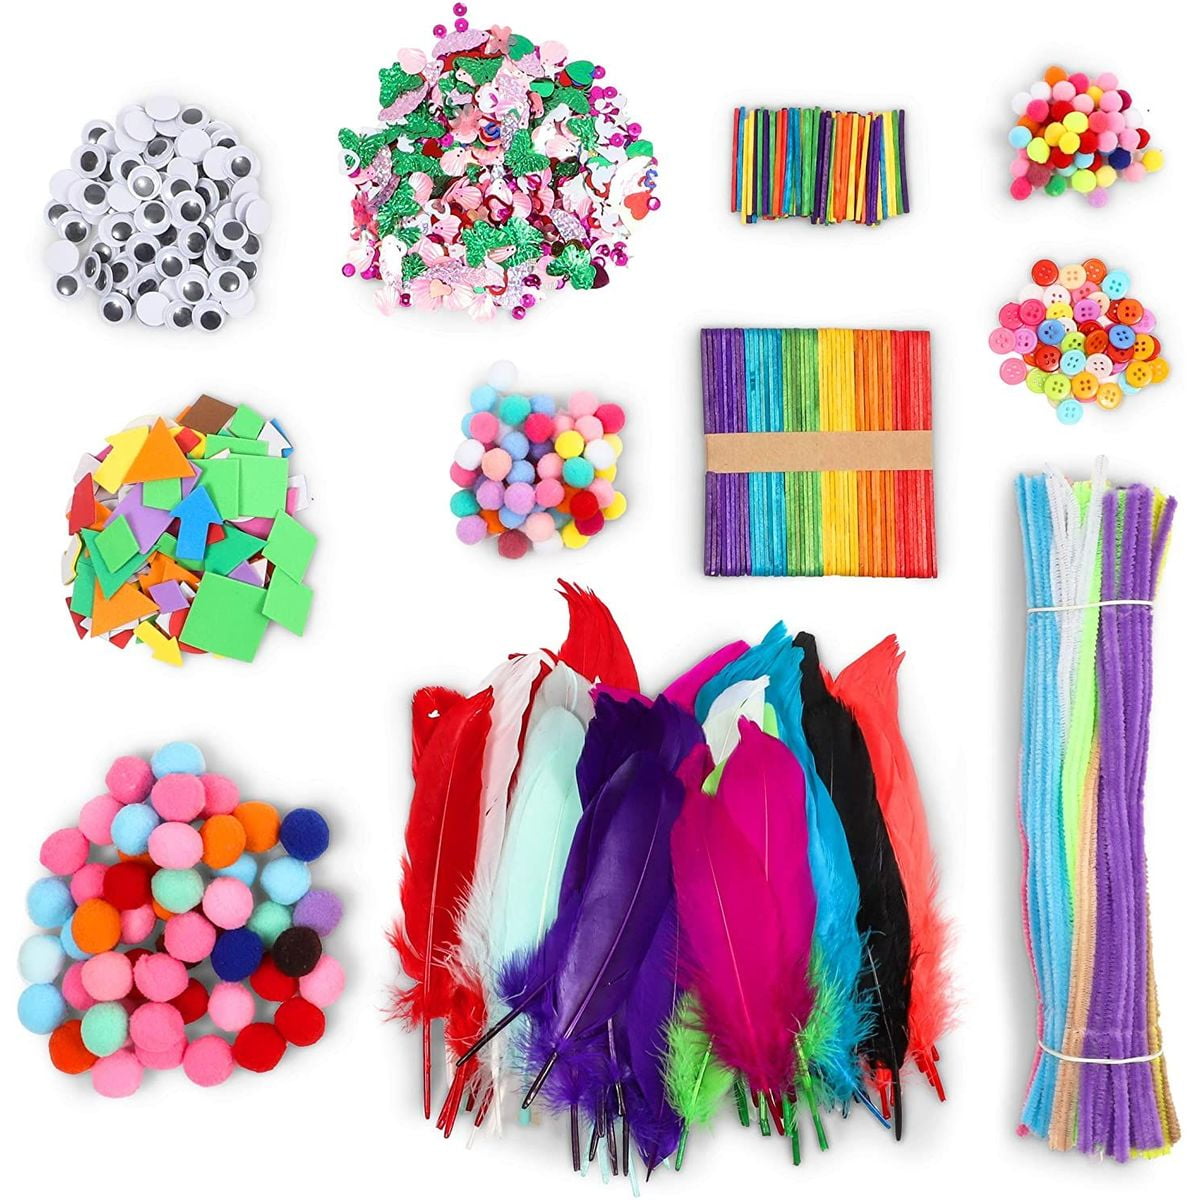 500+ Pcs Fashion Designer Kits with 5 Mannequins - Creativity Diy Arts and  Crafts for Kids Ages 8-12 - Toys for Girls - Sewing Kit for Kids - Birthday  Gift for Girls 6 7 8 9 10 11 12+ 